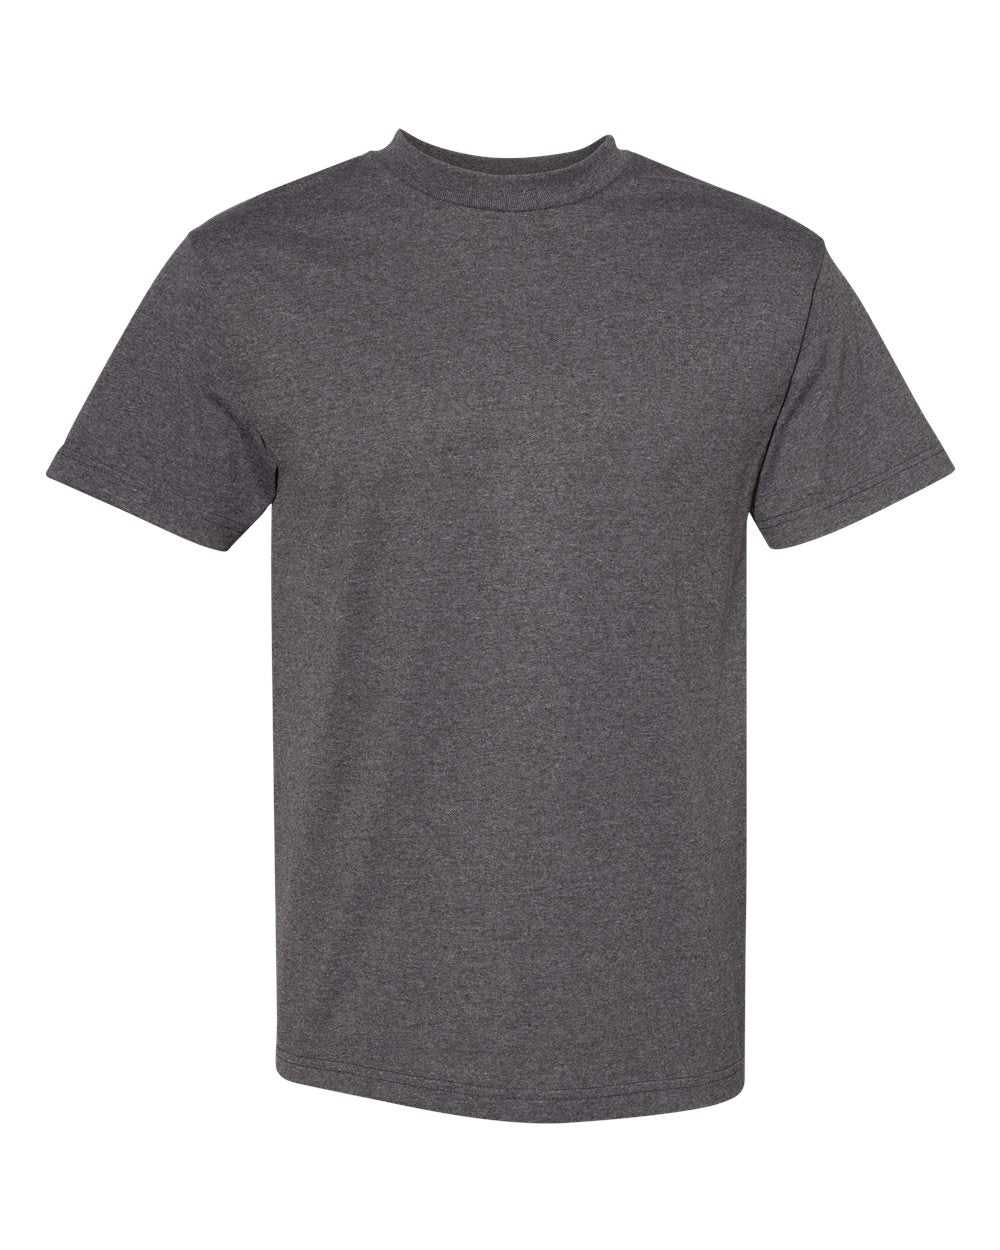 American Apparel 1301 Unisex Heavyweight Cotton T-Shirt - Charcoal Heather - HIT a Double